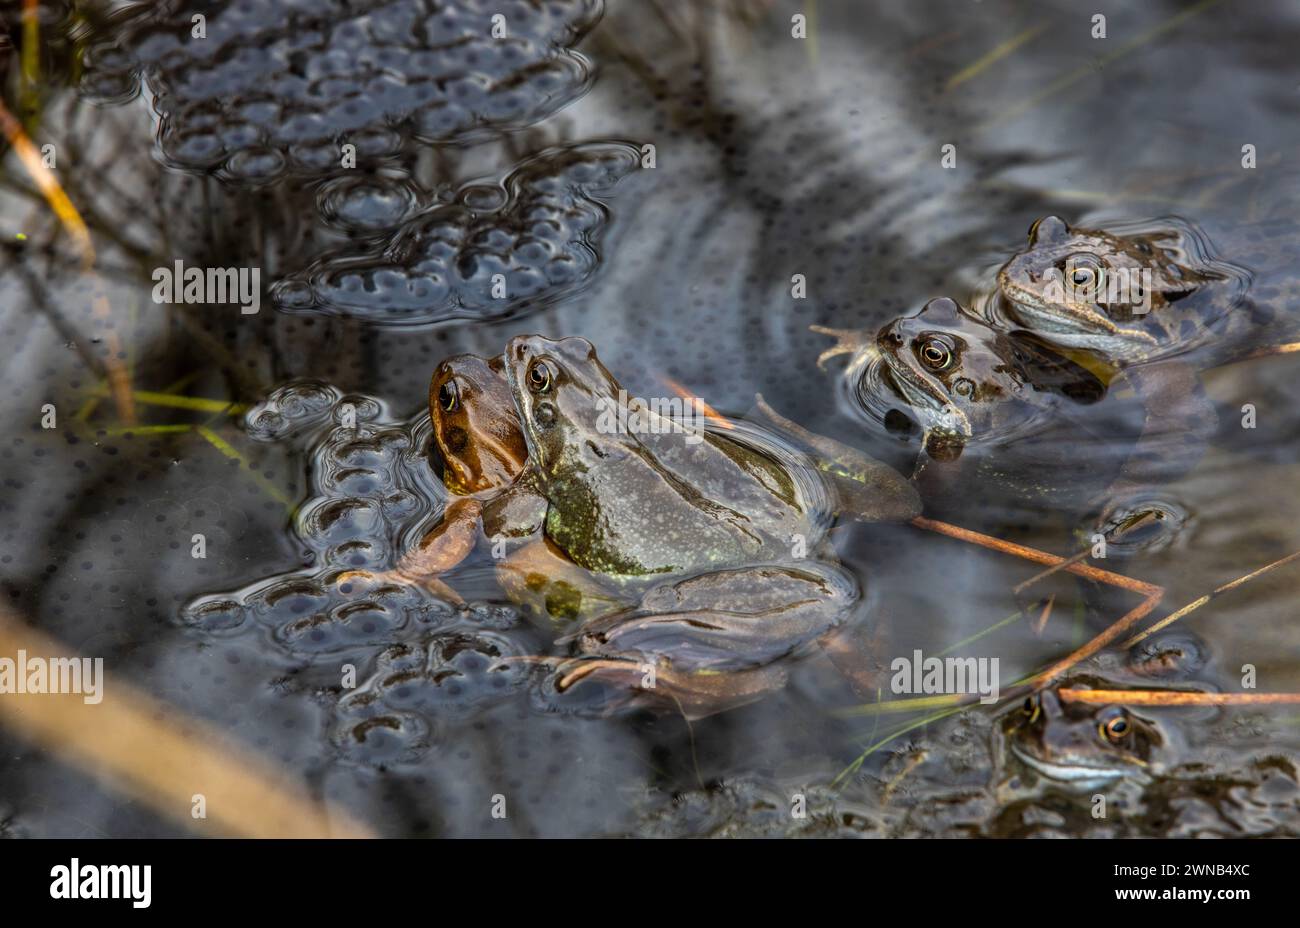 The Common Frog during the breeding season, males and females spawning in a pond Stock Photo